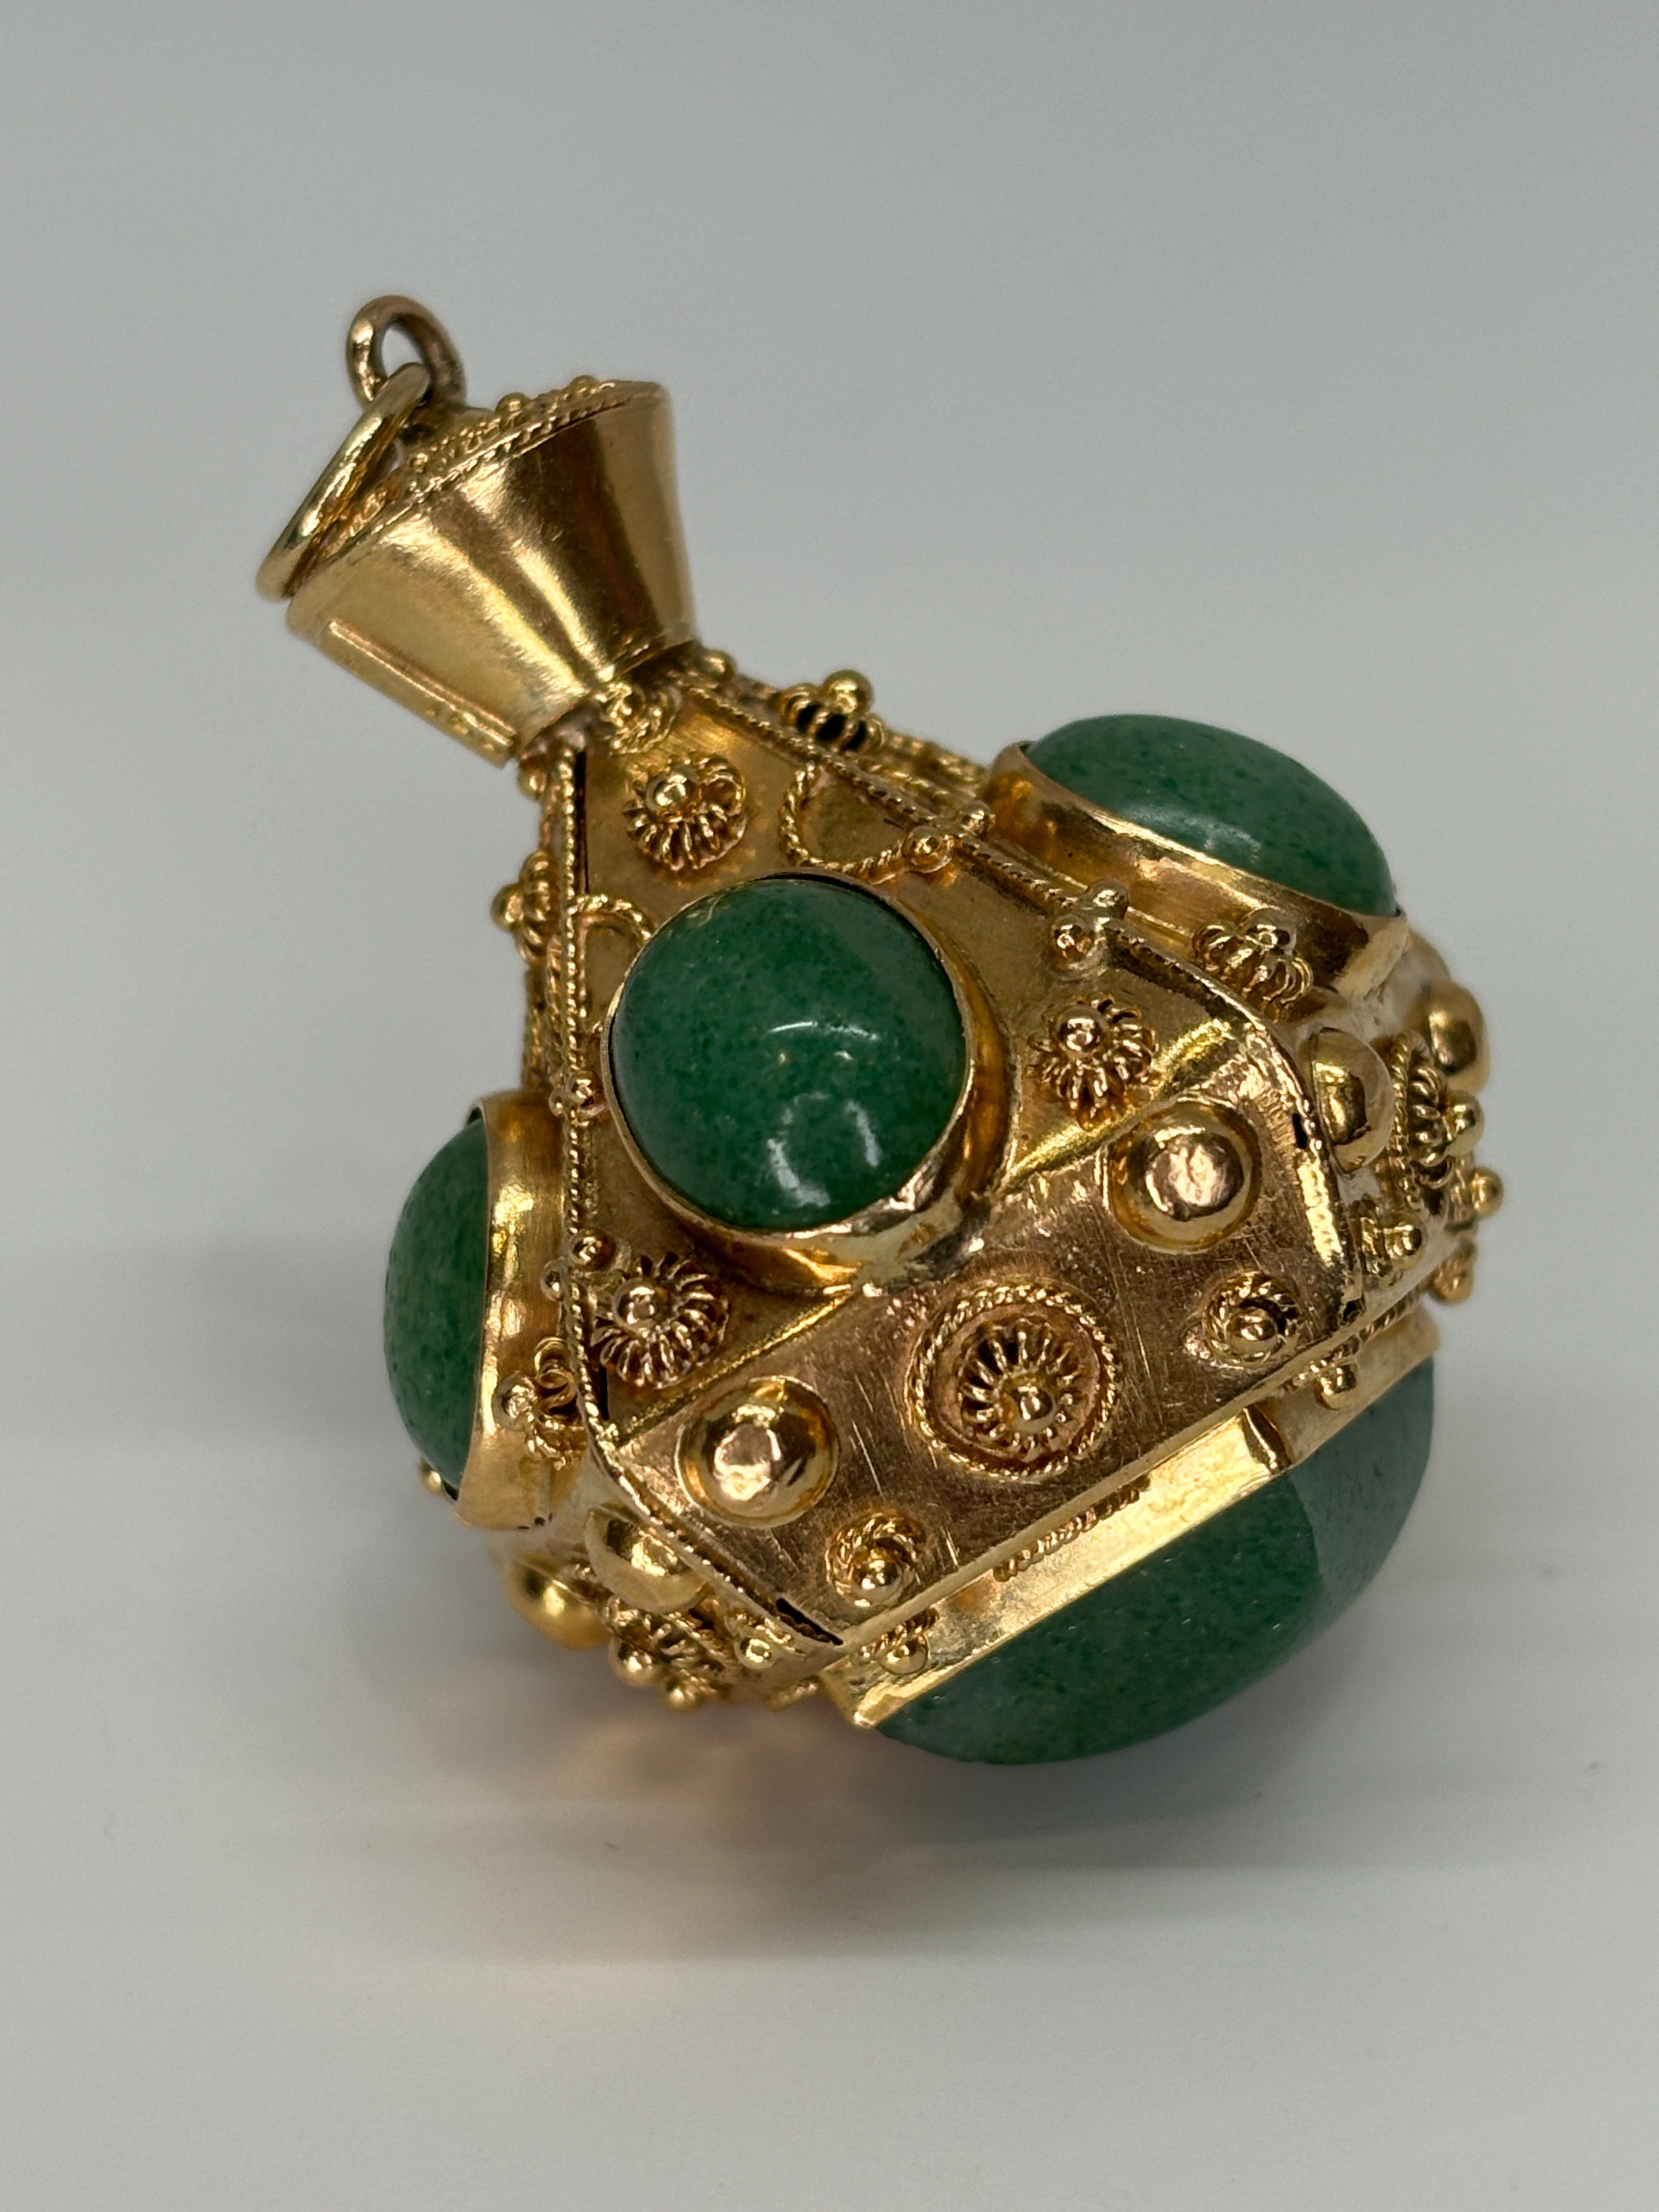 This vintage 18k gold Italian charm is encrusted  with vivid green aventurine set among Etruscan Revival wirework and granulation. The ornate vintage piece was most likely first purchased at the Ponte Vecchio, a bridge in Florence famous for its